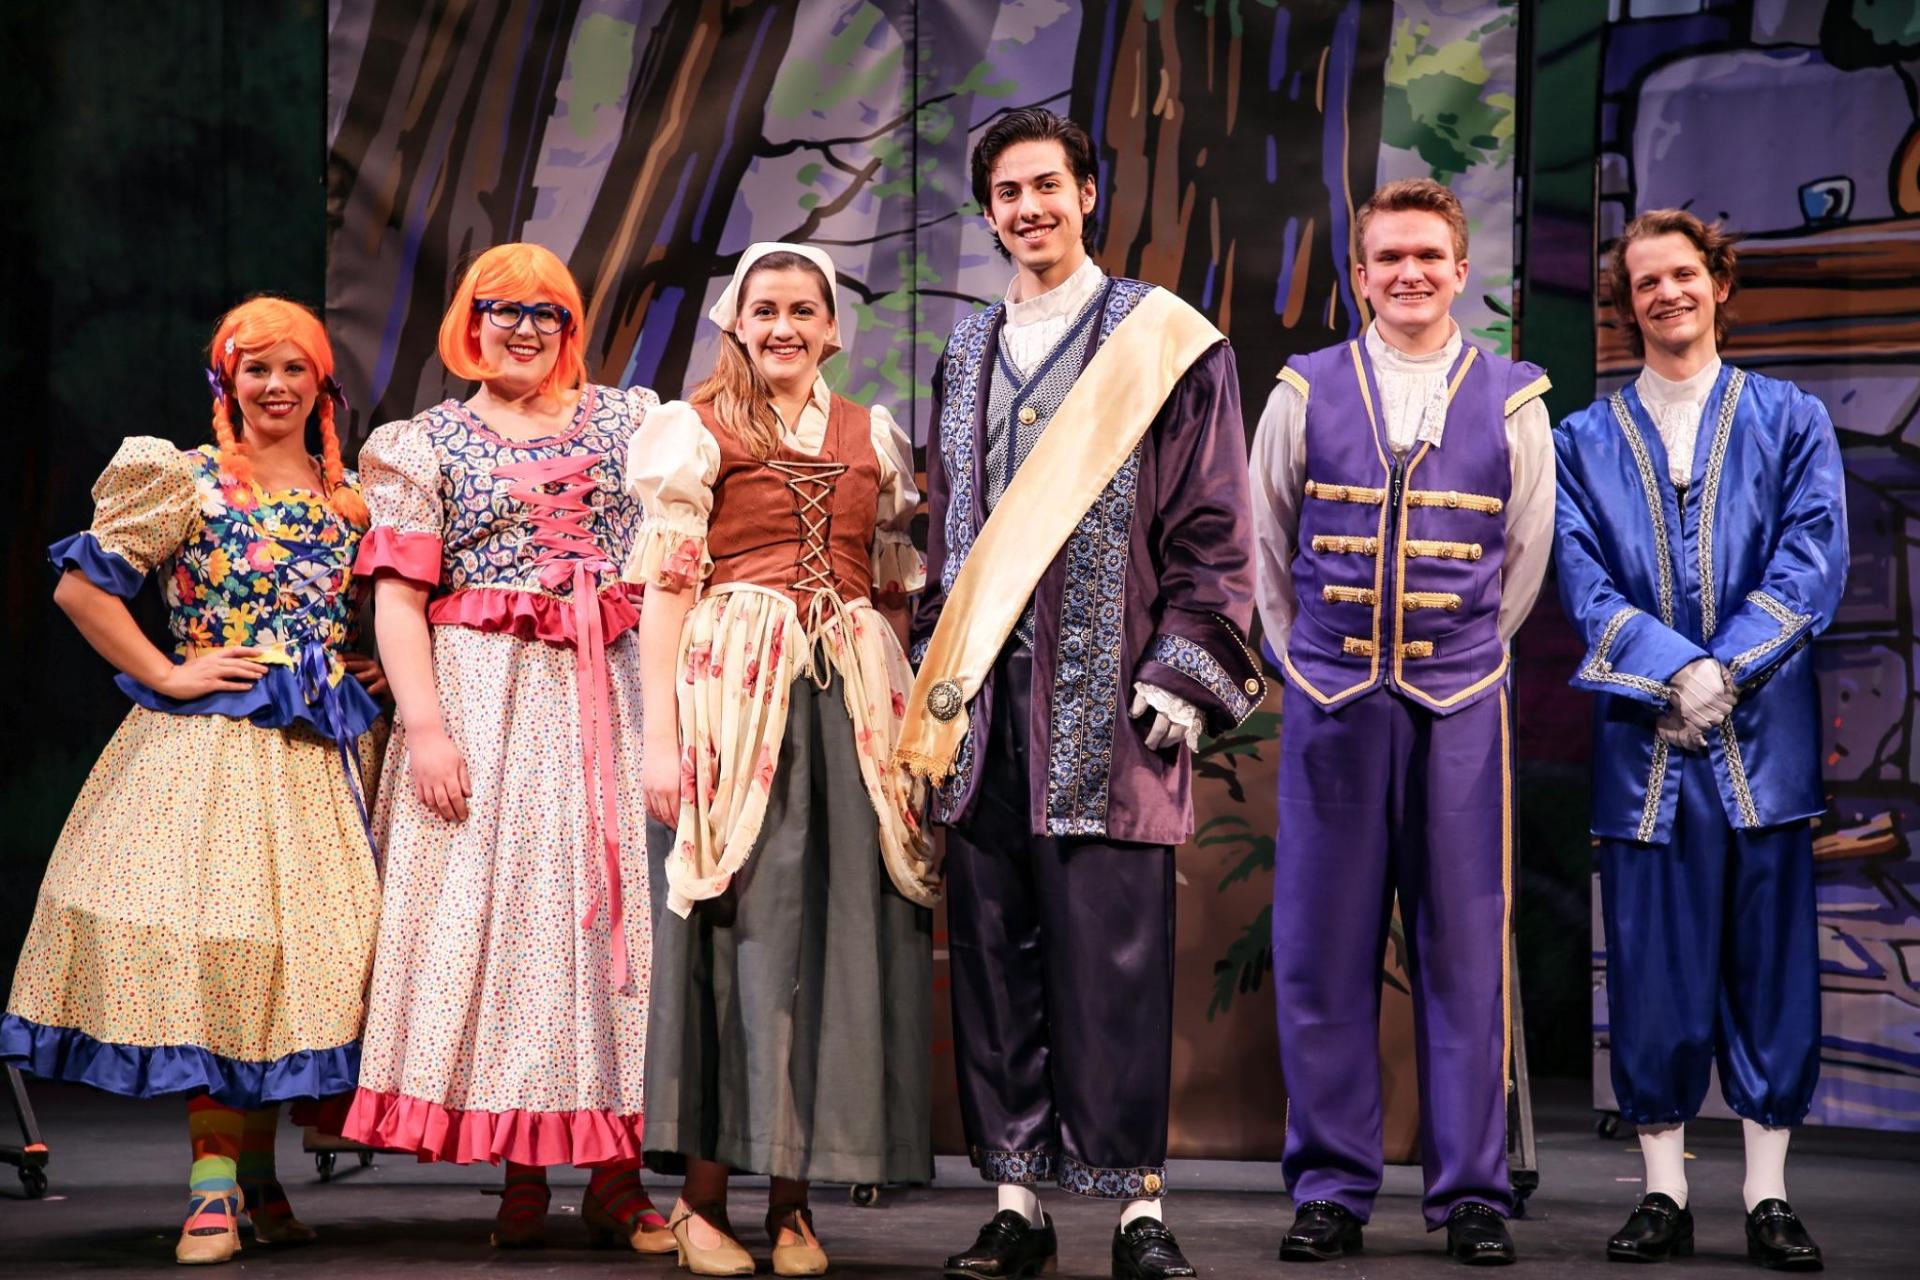 The cast of Cinderella on stage.